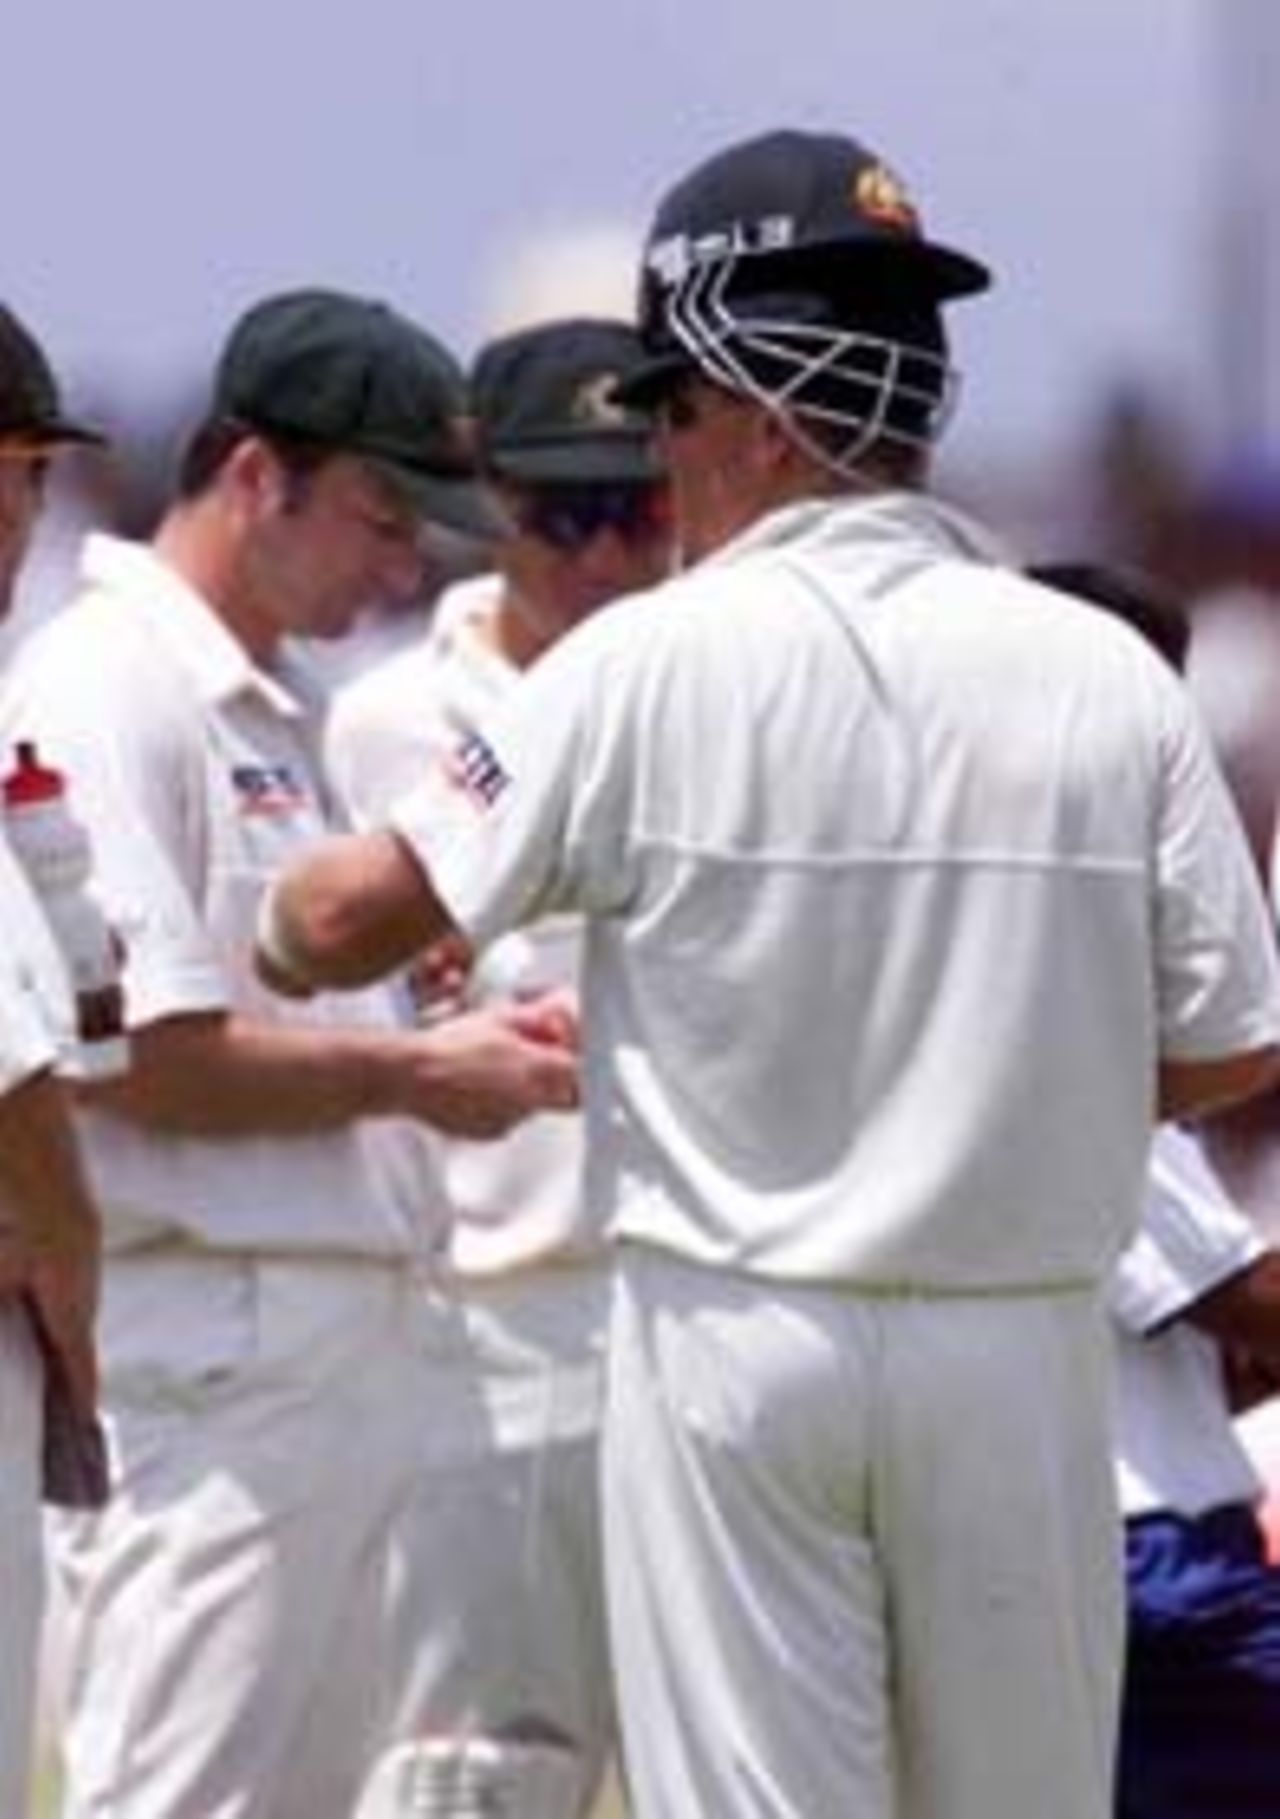 22 Sep 1999: Shane Warne of Australia wearing a helmet back to front, with Steve Waugh in the background, during day one of the second test between Sri Lanka and Australia at Galle International Stadium, Galle, Sri Lanka.